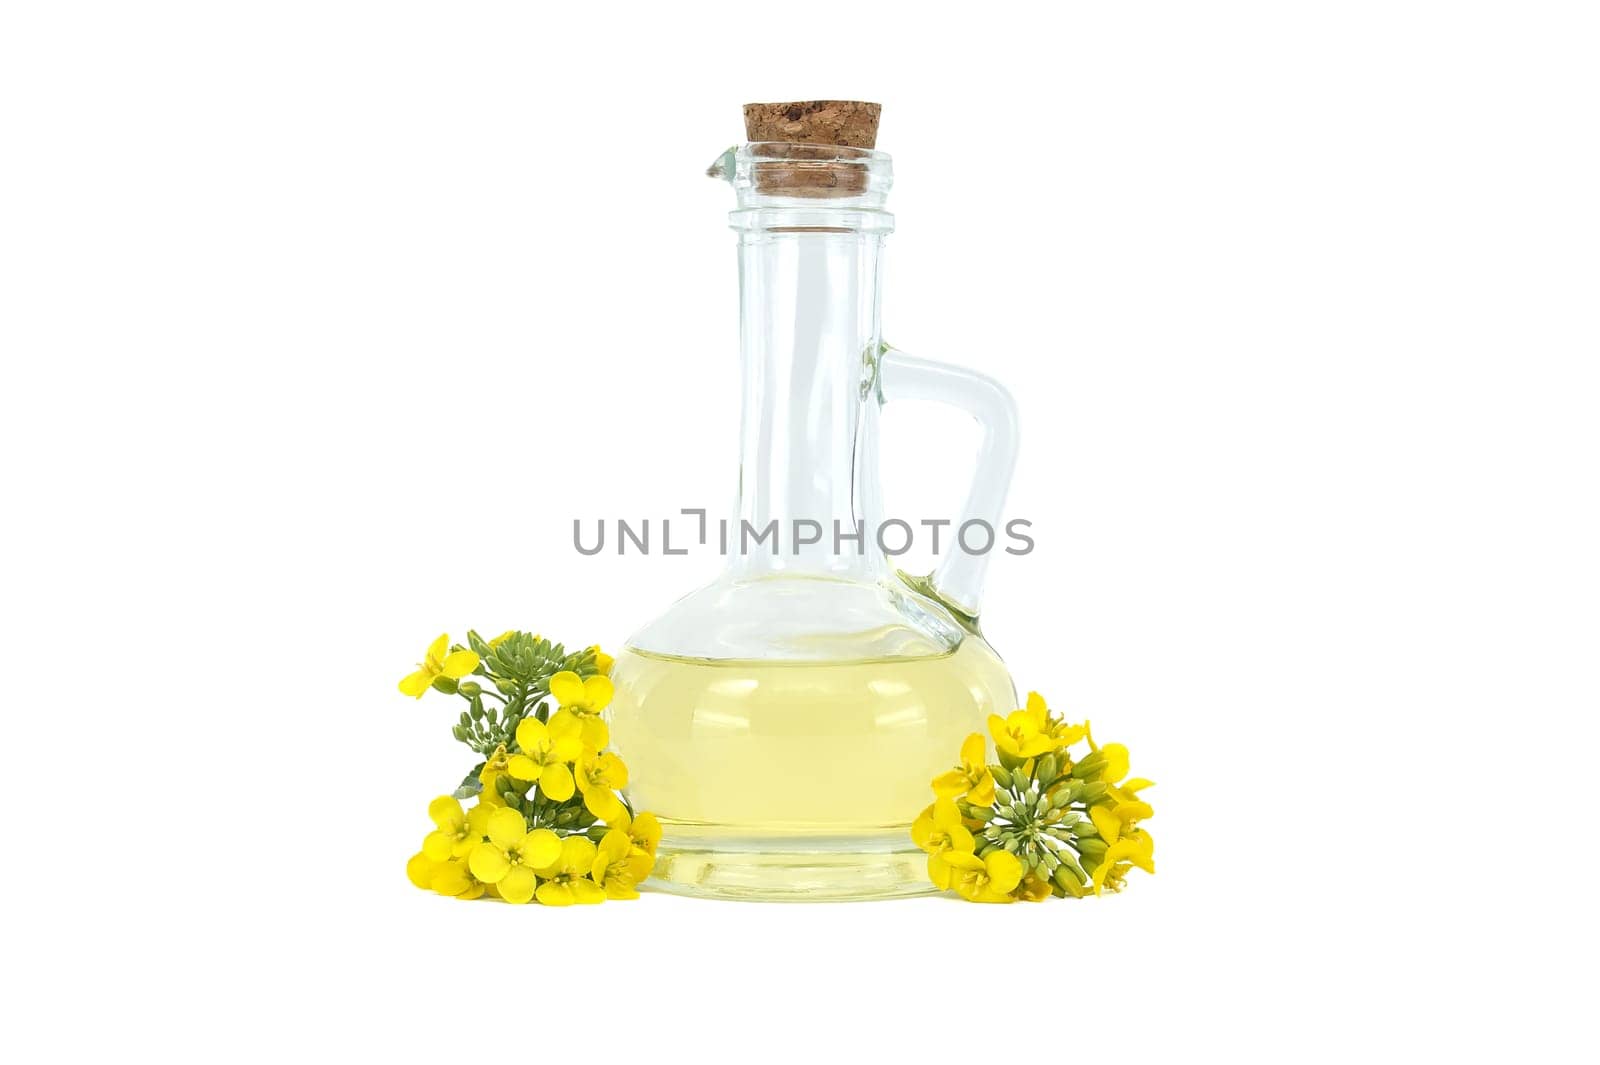 Glass jug with a handle, brimming with rapeseed or canola oil and sealed with a cork, stands beside vibrant yellow oilseed rape blossoms, set against an isolated white background